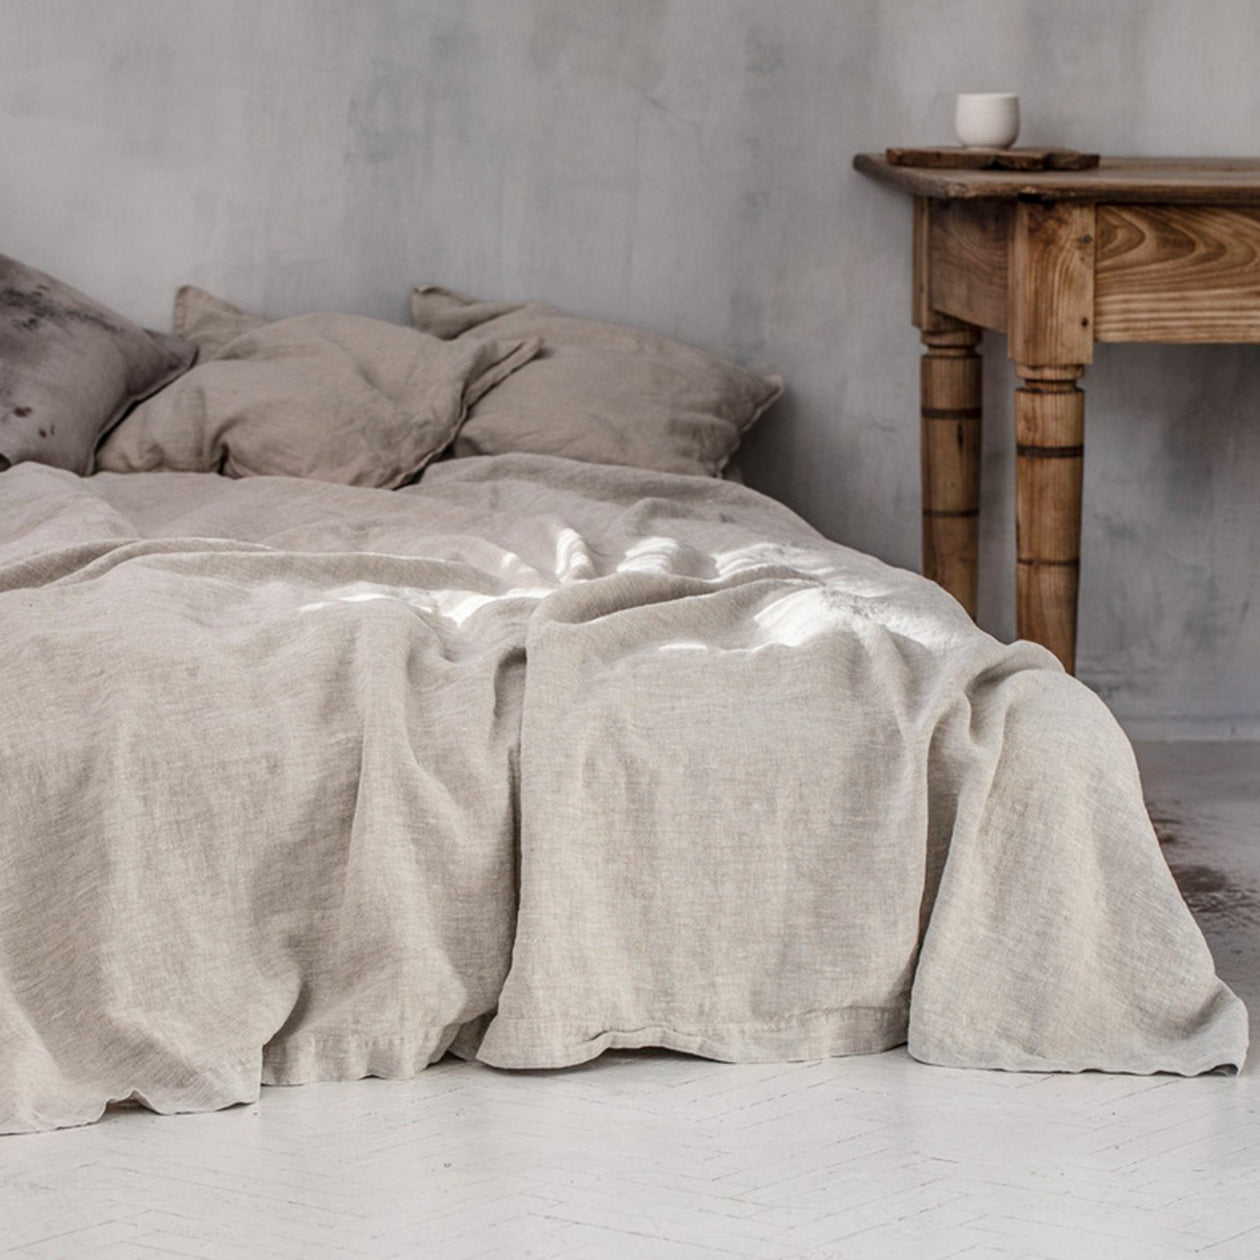 Comfort-Washed French Flax Linen Bedding Set